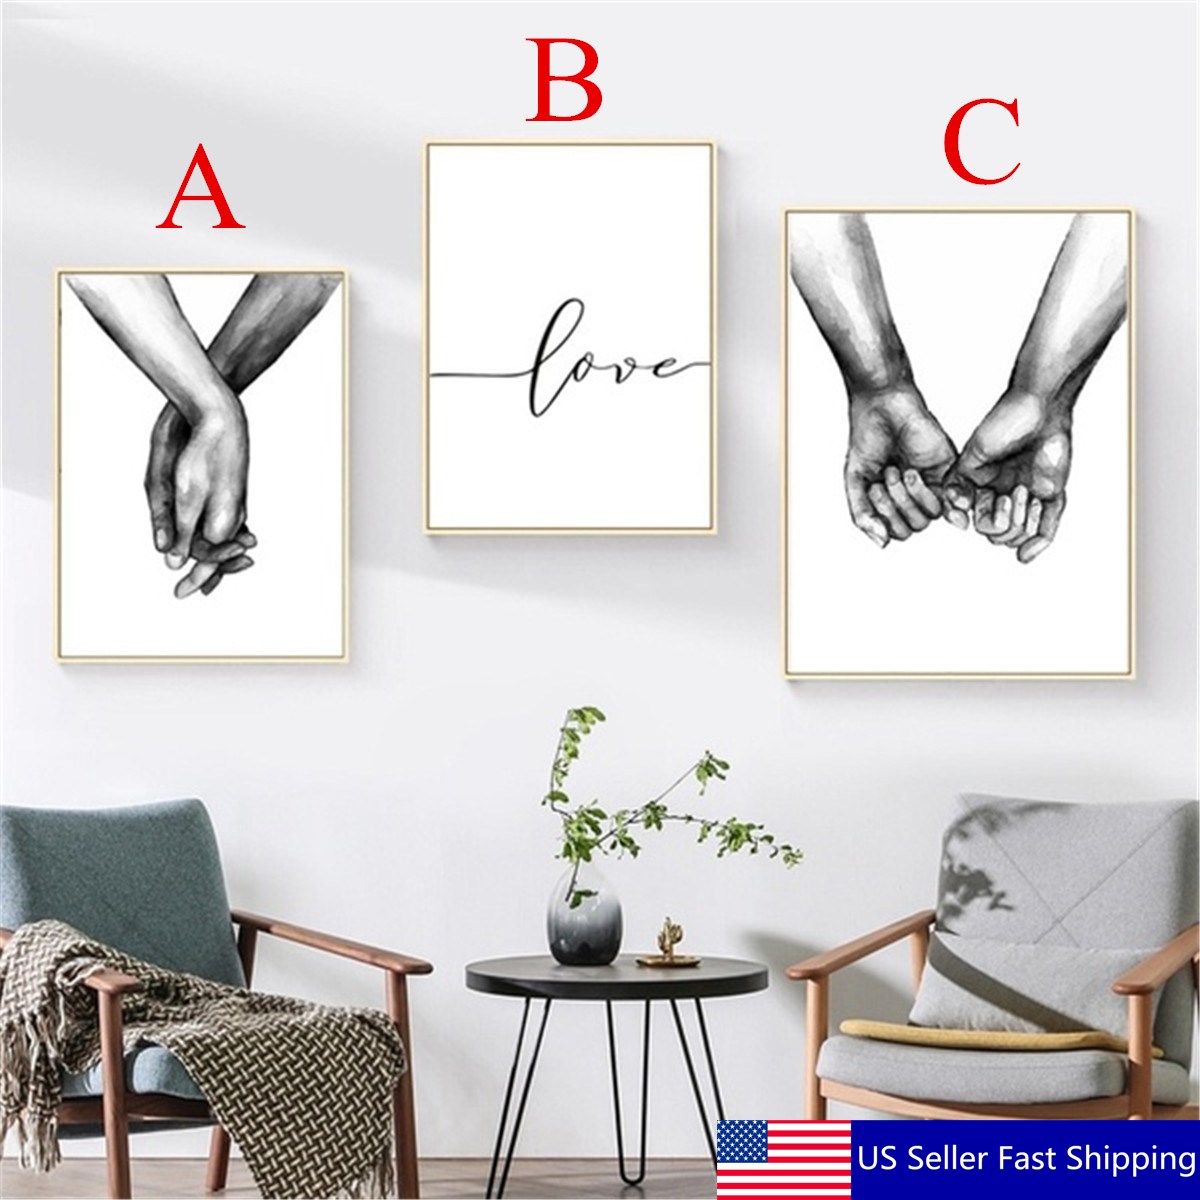 Holding-Hand-Black-And-White-Picture-Cambric-Prints-Painting-Love-Wall-Sticker-Home-Decor-1595537-1